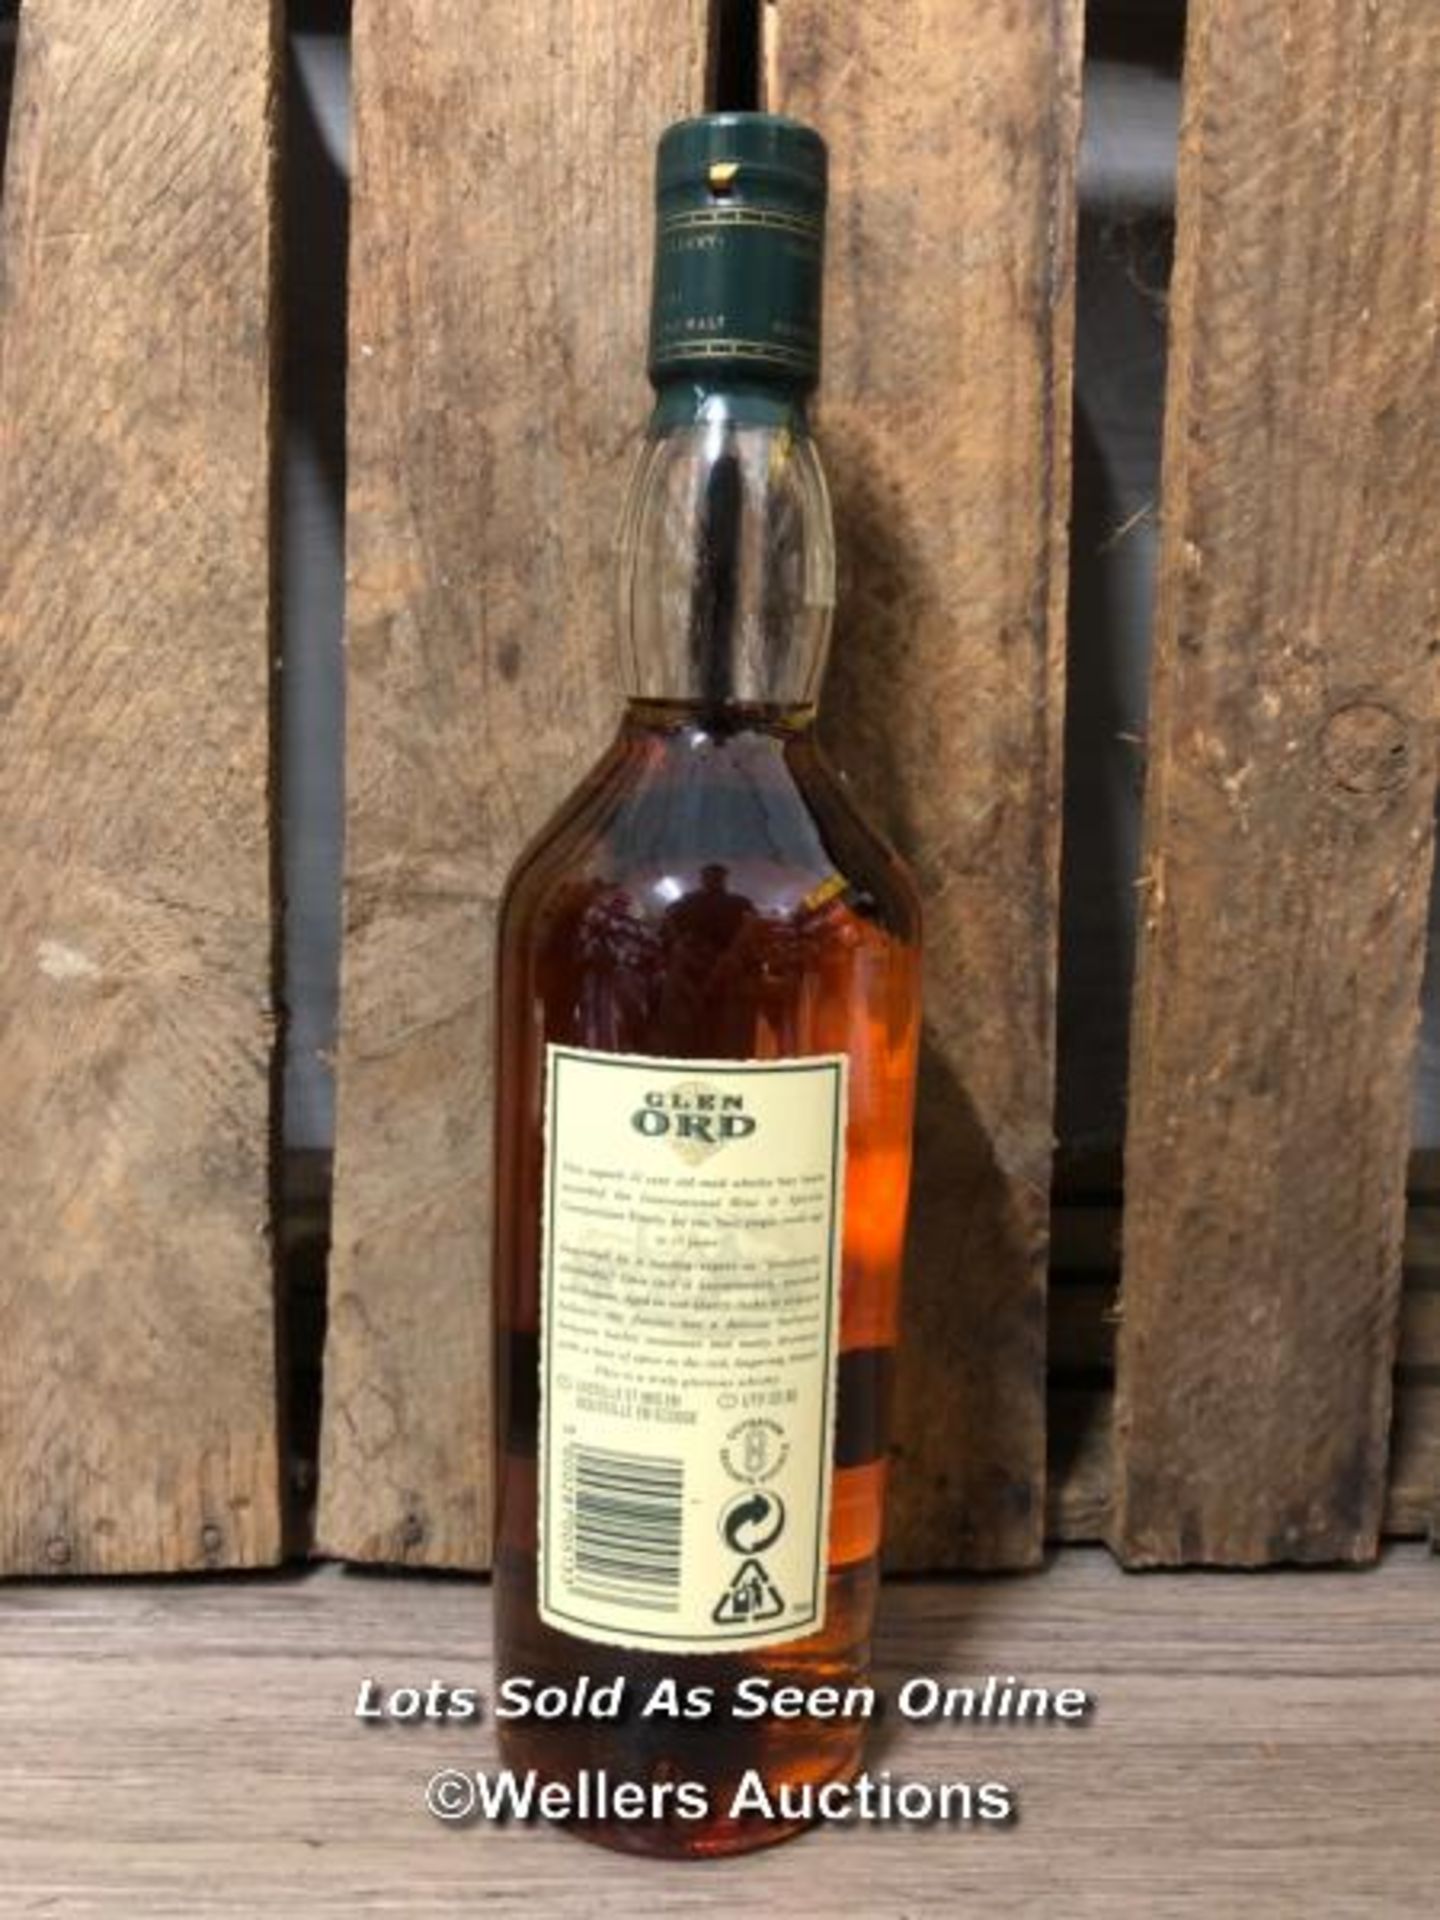 GLEN ORD 12 YEARS OLD SINGLE MALT SCOTCH WHISKY, 700ML, 40% VOL, WITH BOX - Image 3 of 5